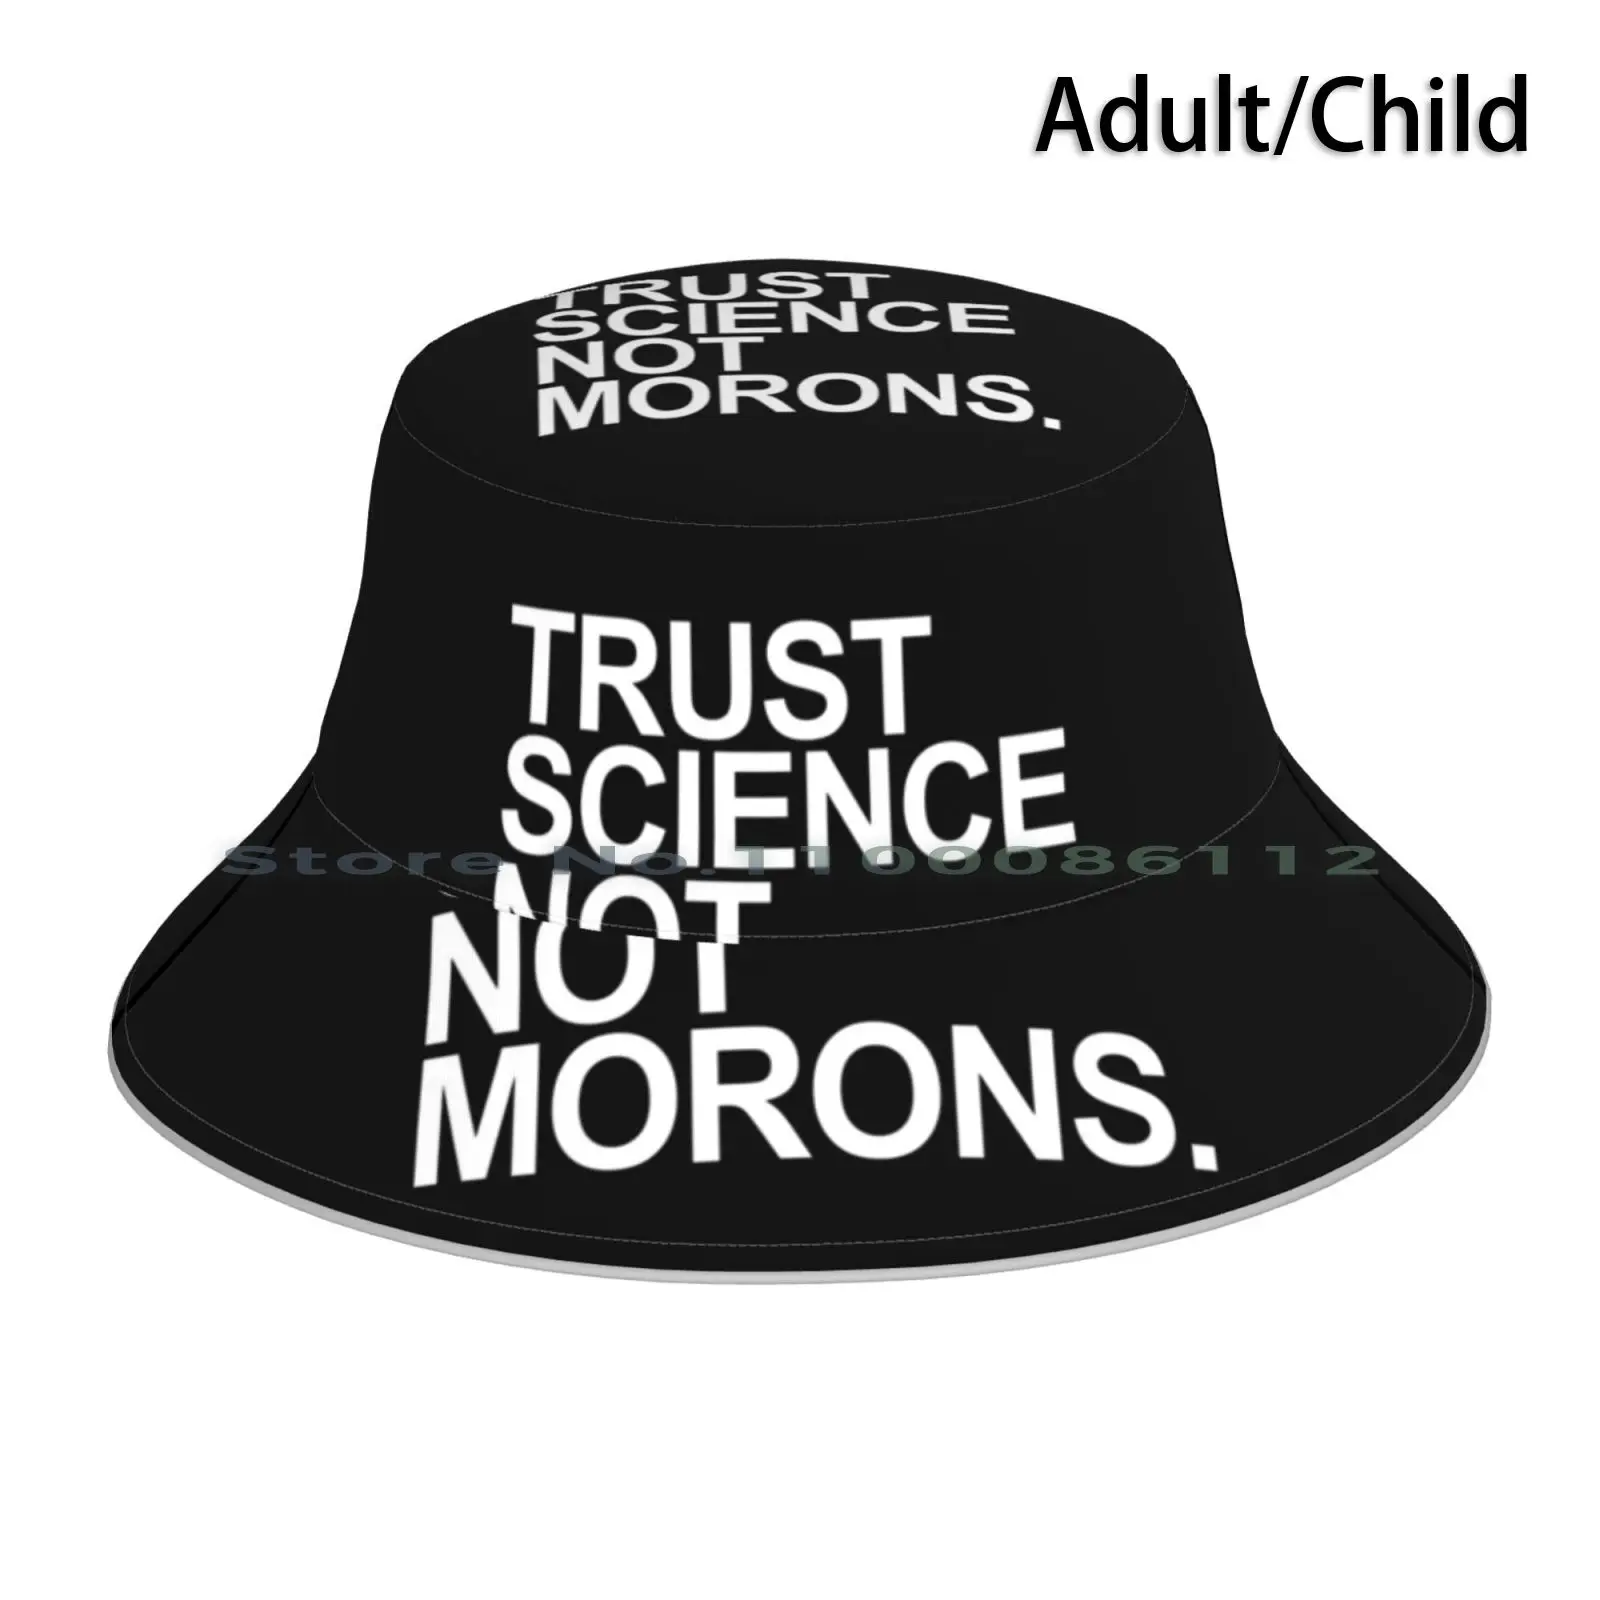 

Trust Science Not Morons Bucket Hat Sun Cap Trust Science Not Morons 19 Anti Trump Idiot Plandemic In Fauci We Trust Masks Save